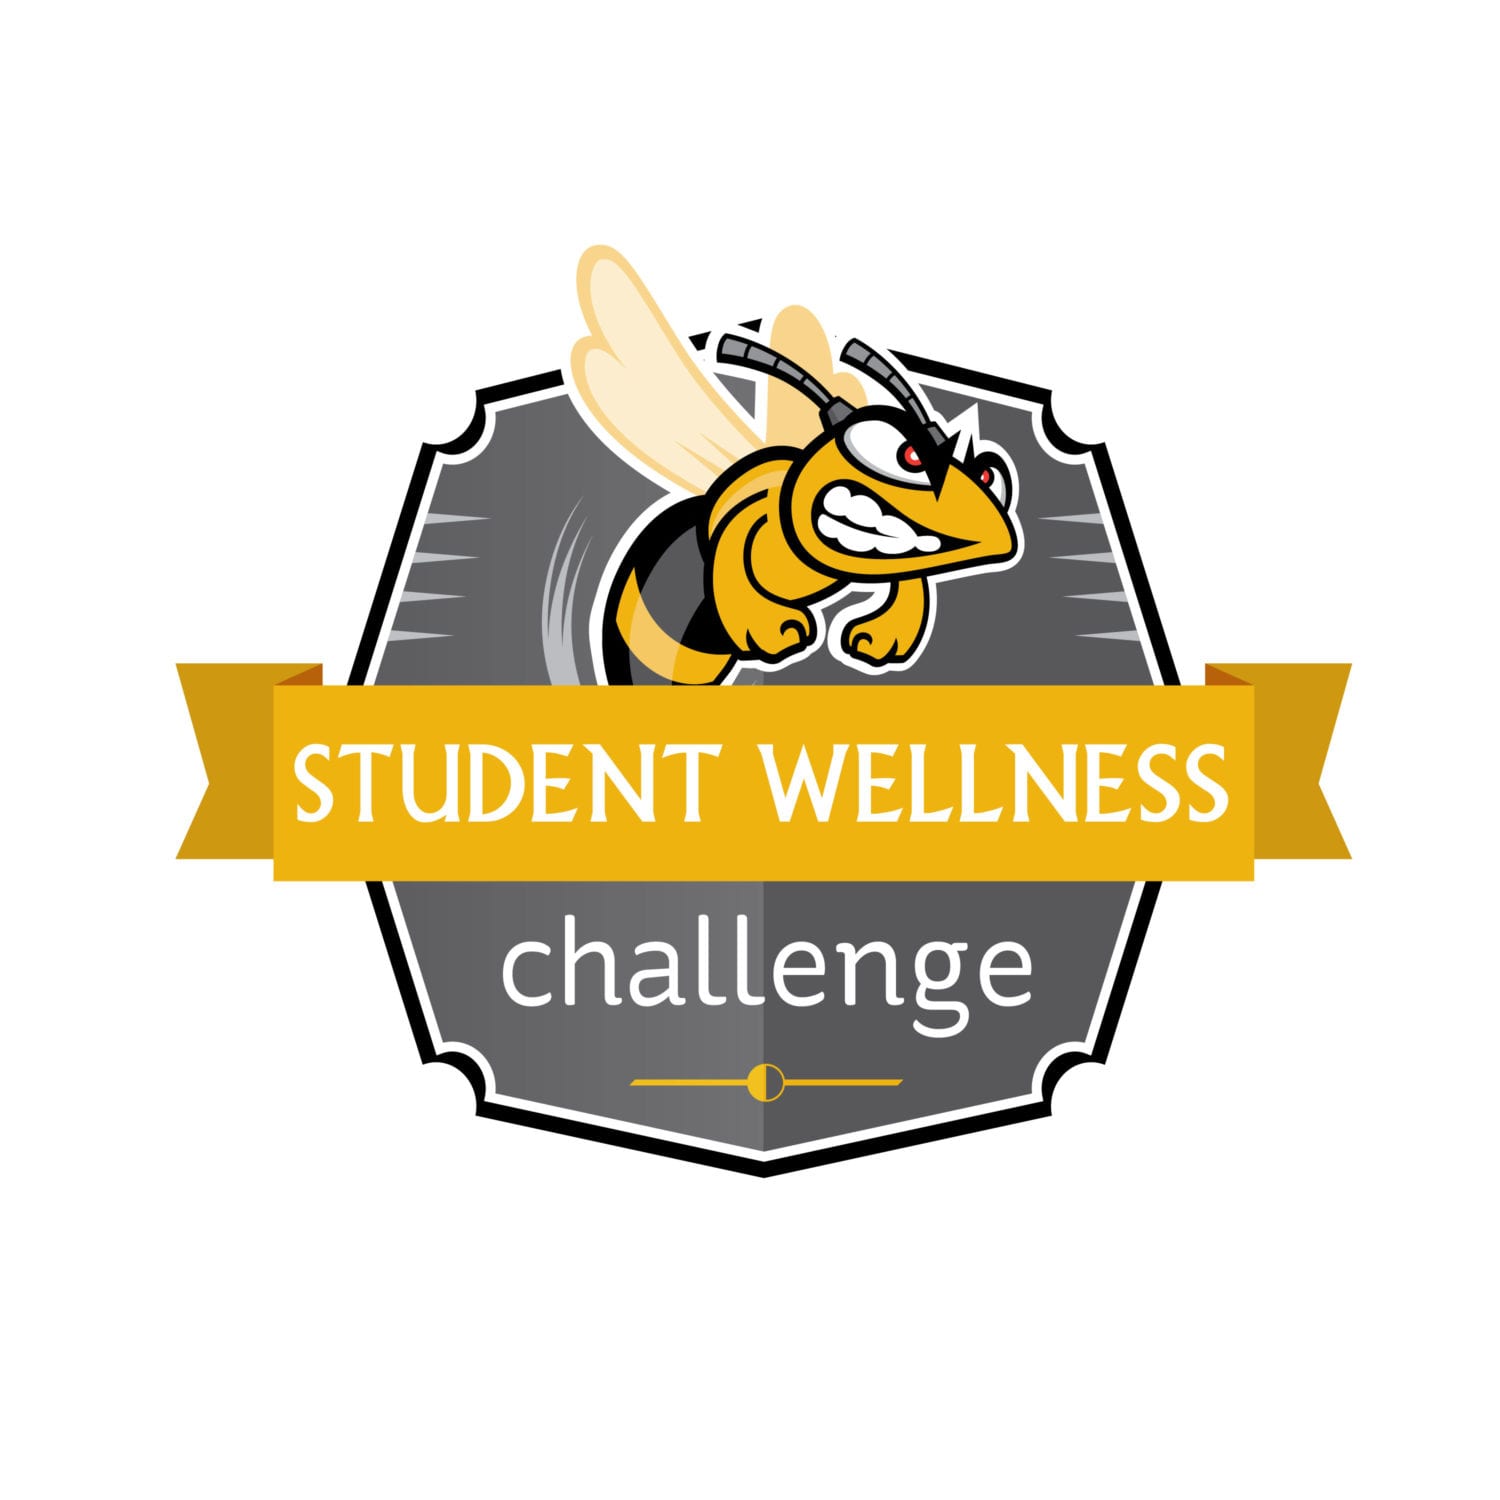 Register for the SUNY Broome Student Wellness Challenge before March 23